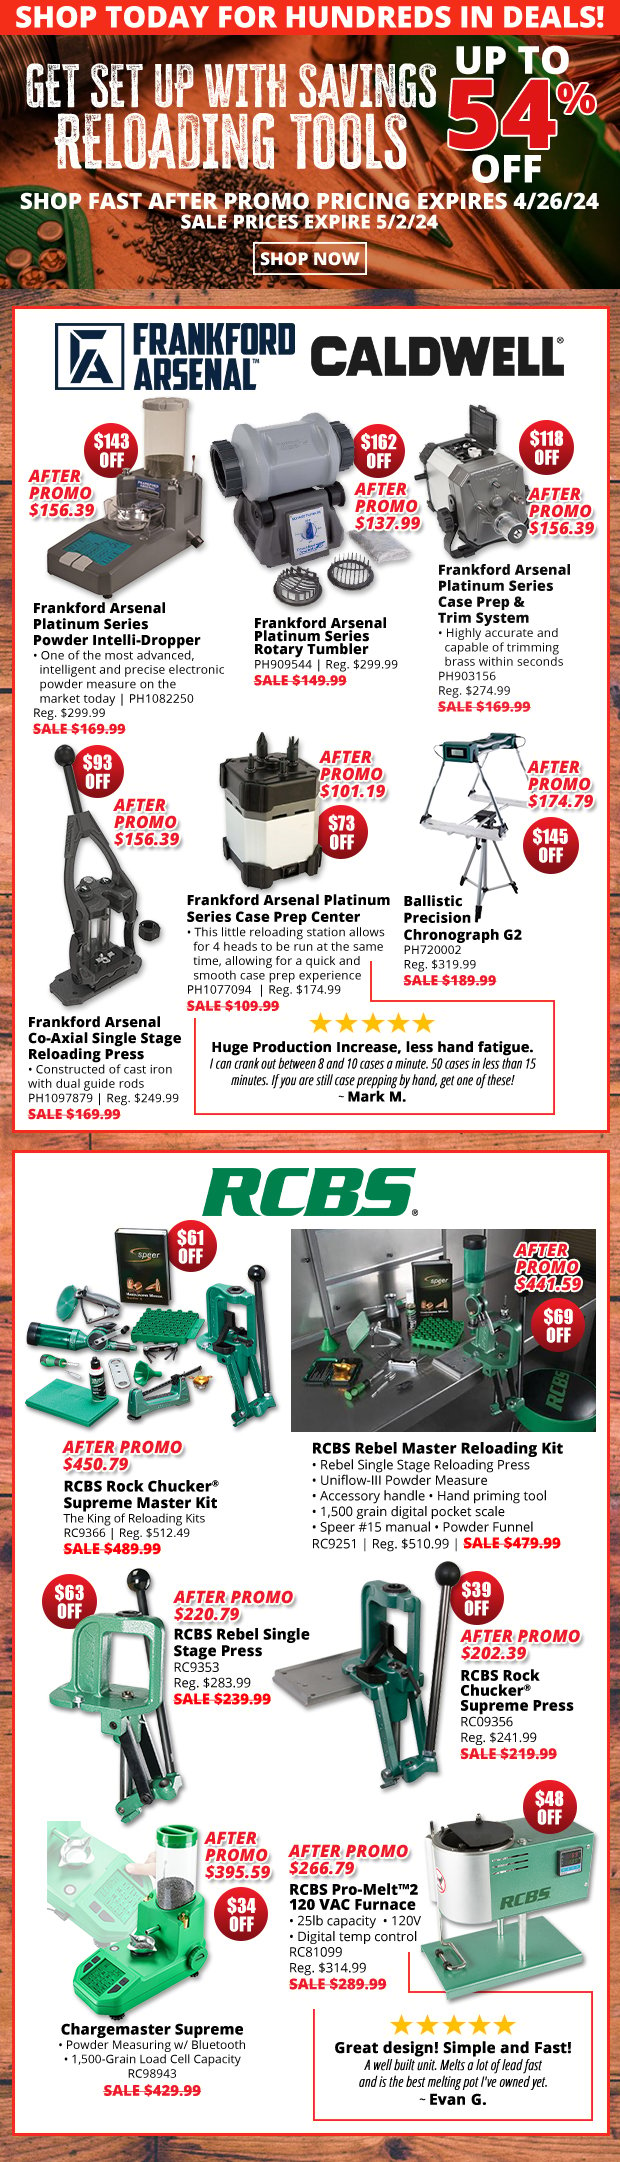 Up to 54% Off Reloading Tools!